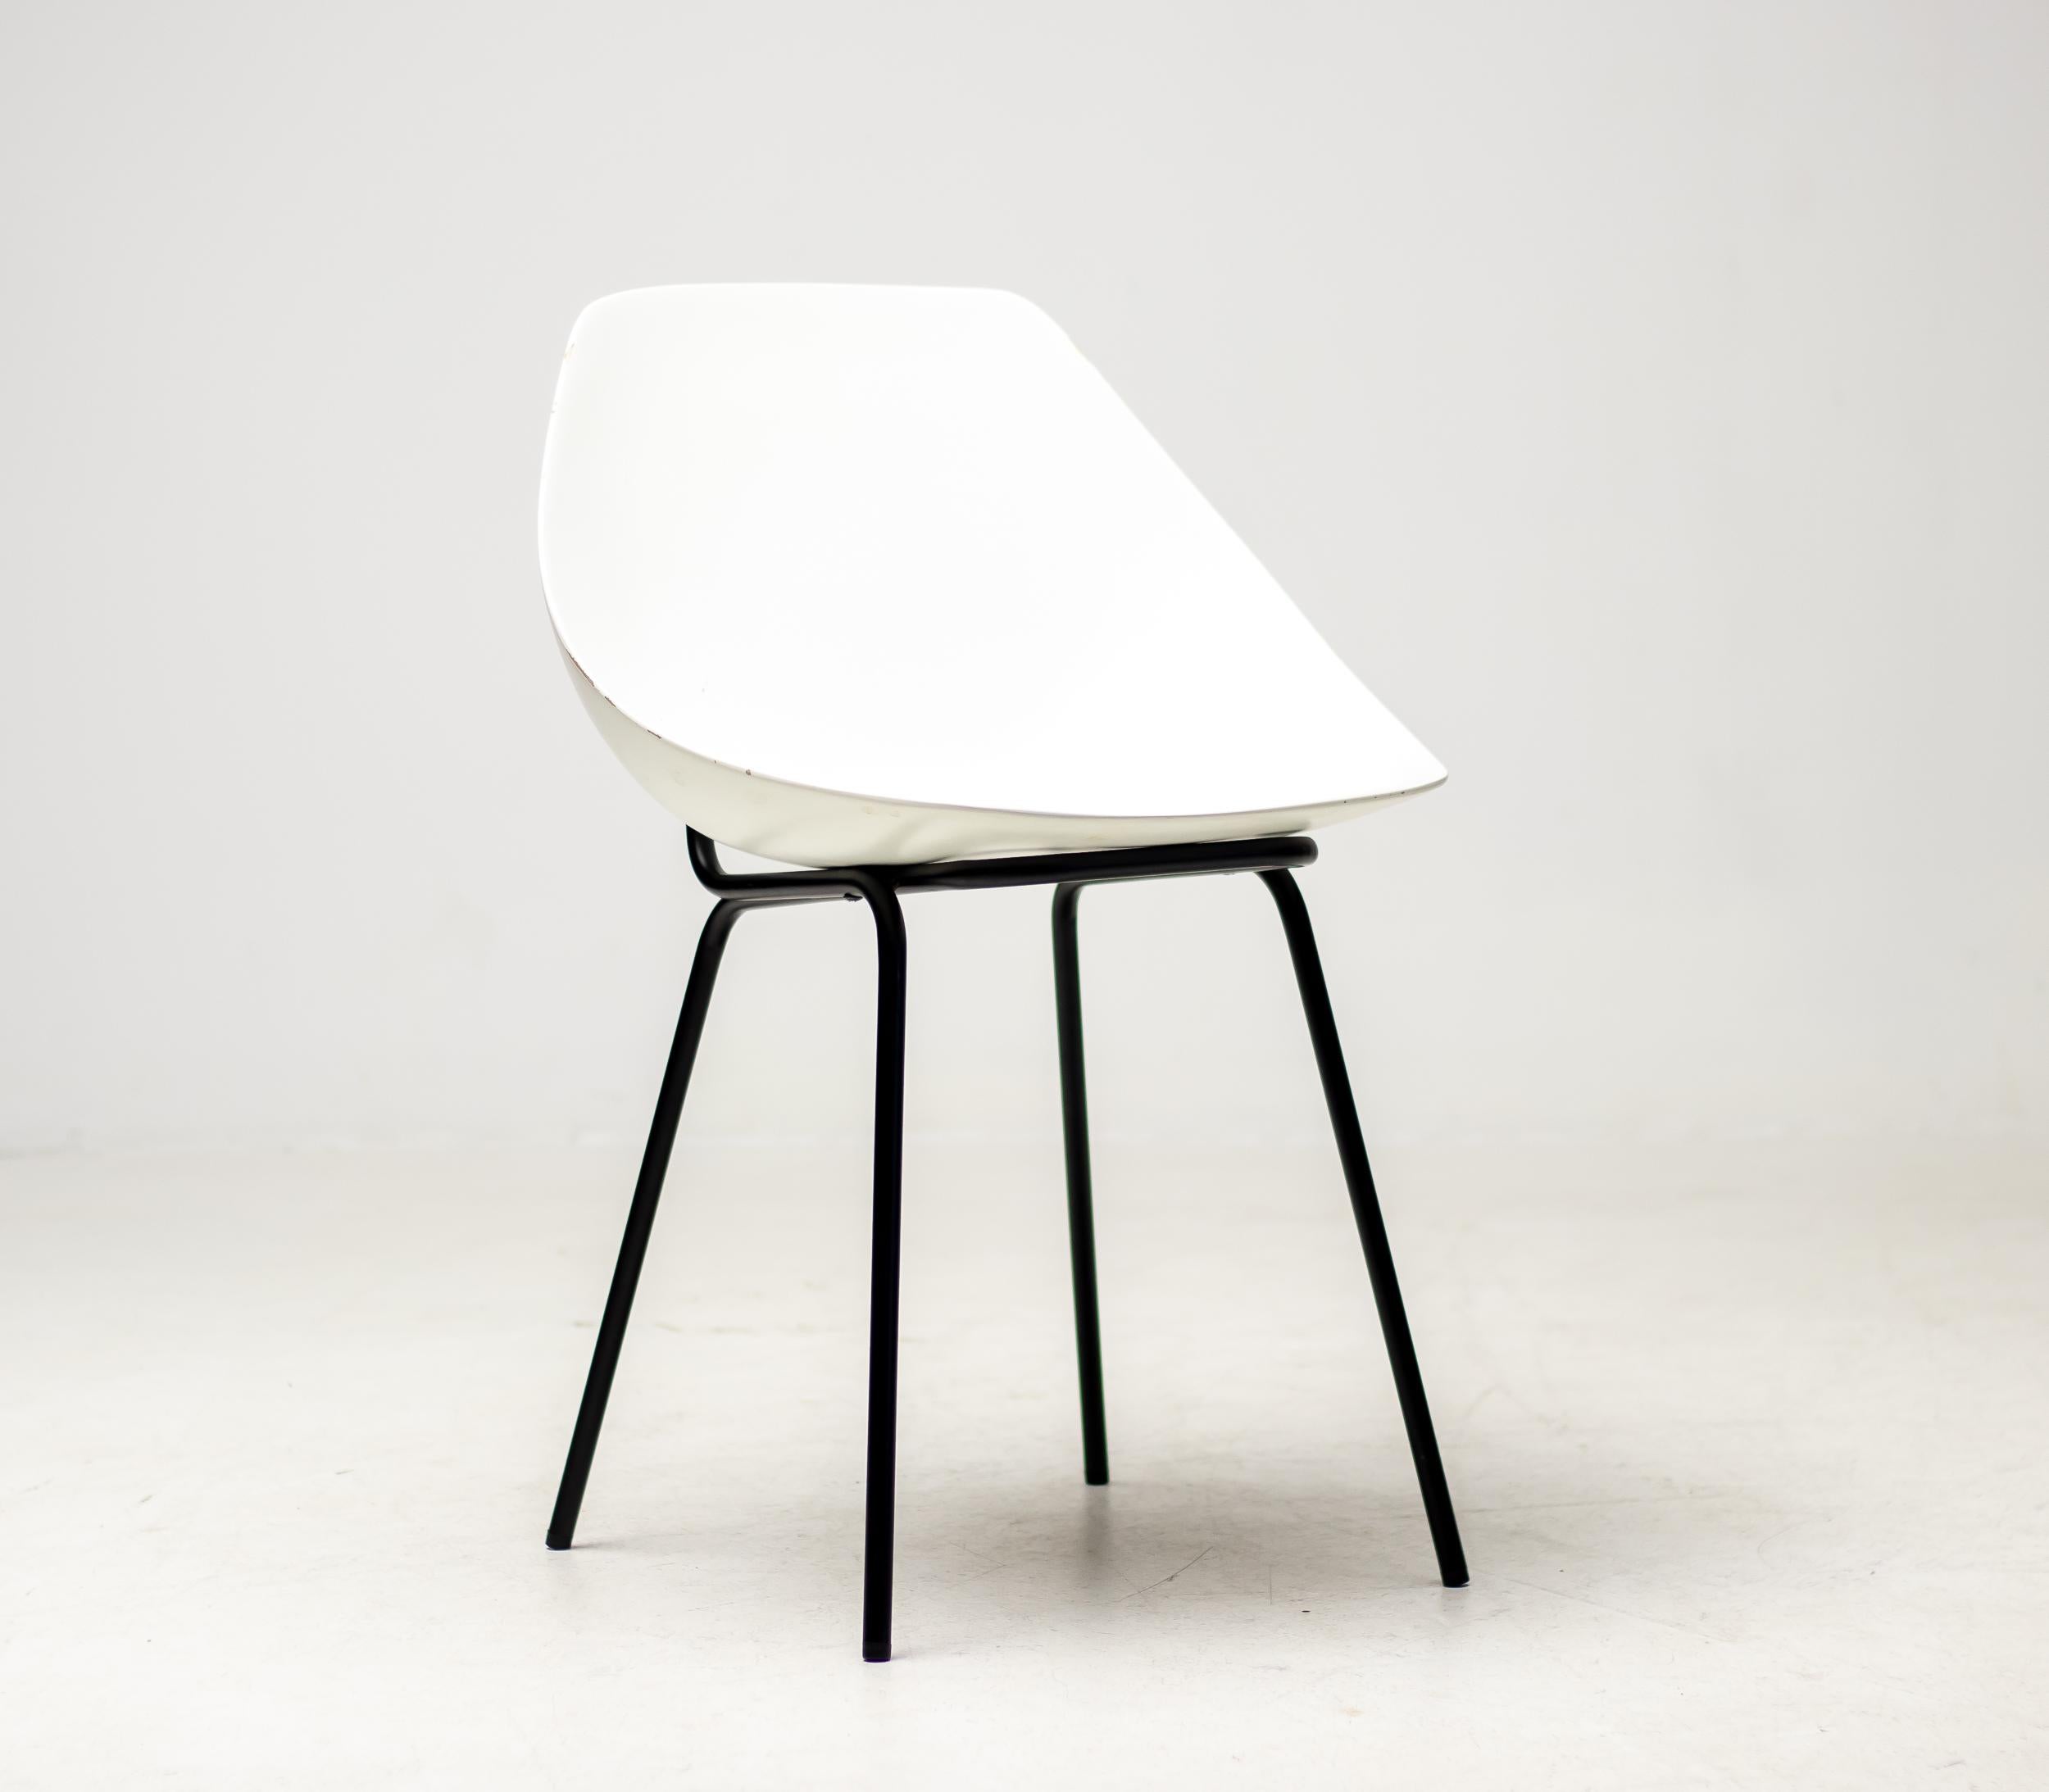 White fiberglass shell chairs designed in the 1950s by Pierre Guariche.
For a very short period the Coquillage or Scallop chair was reissued by Maisons du Monde, France.
Each chair is marked with the signature of the designer.
Priced individually, 6